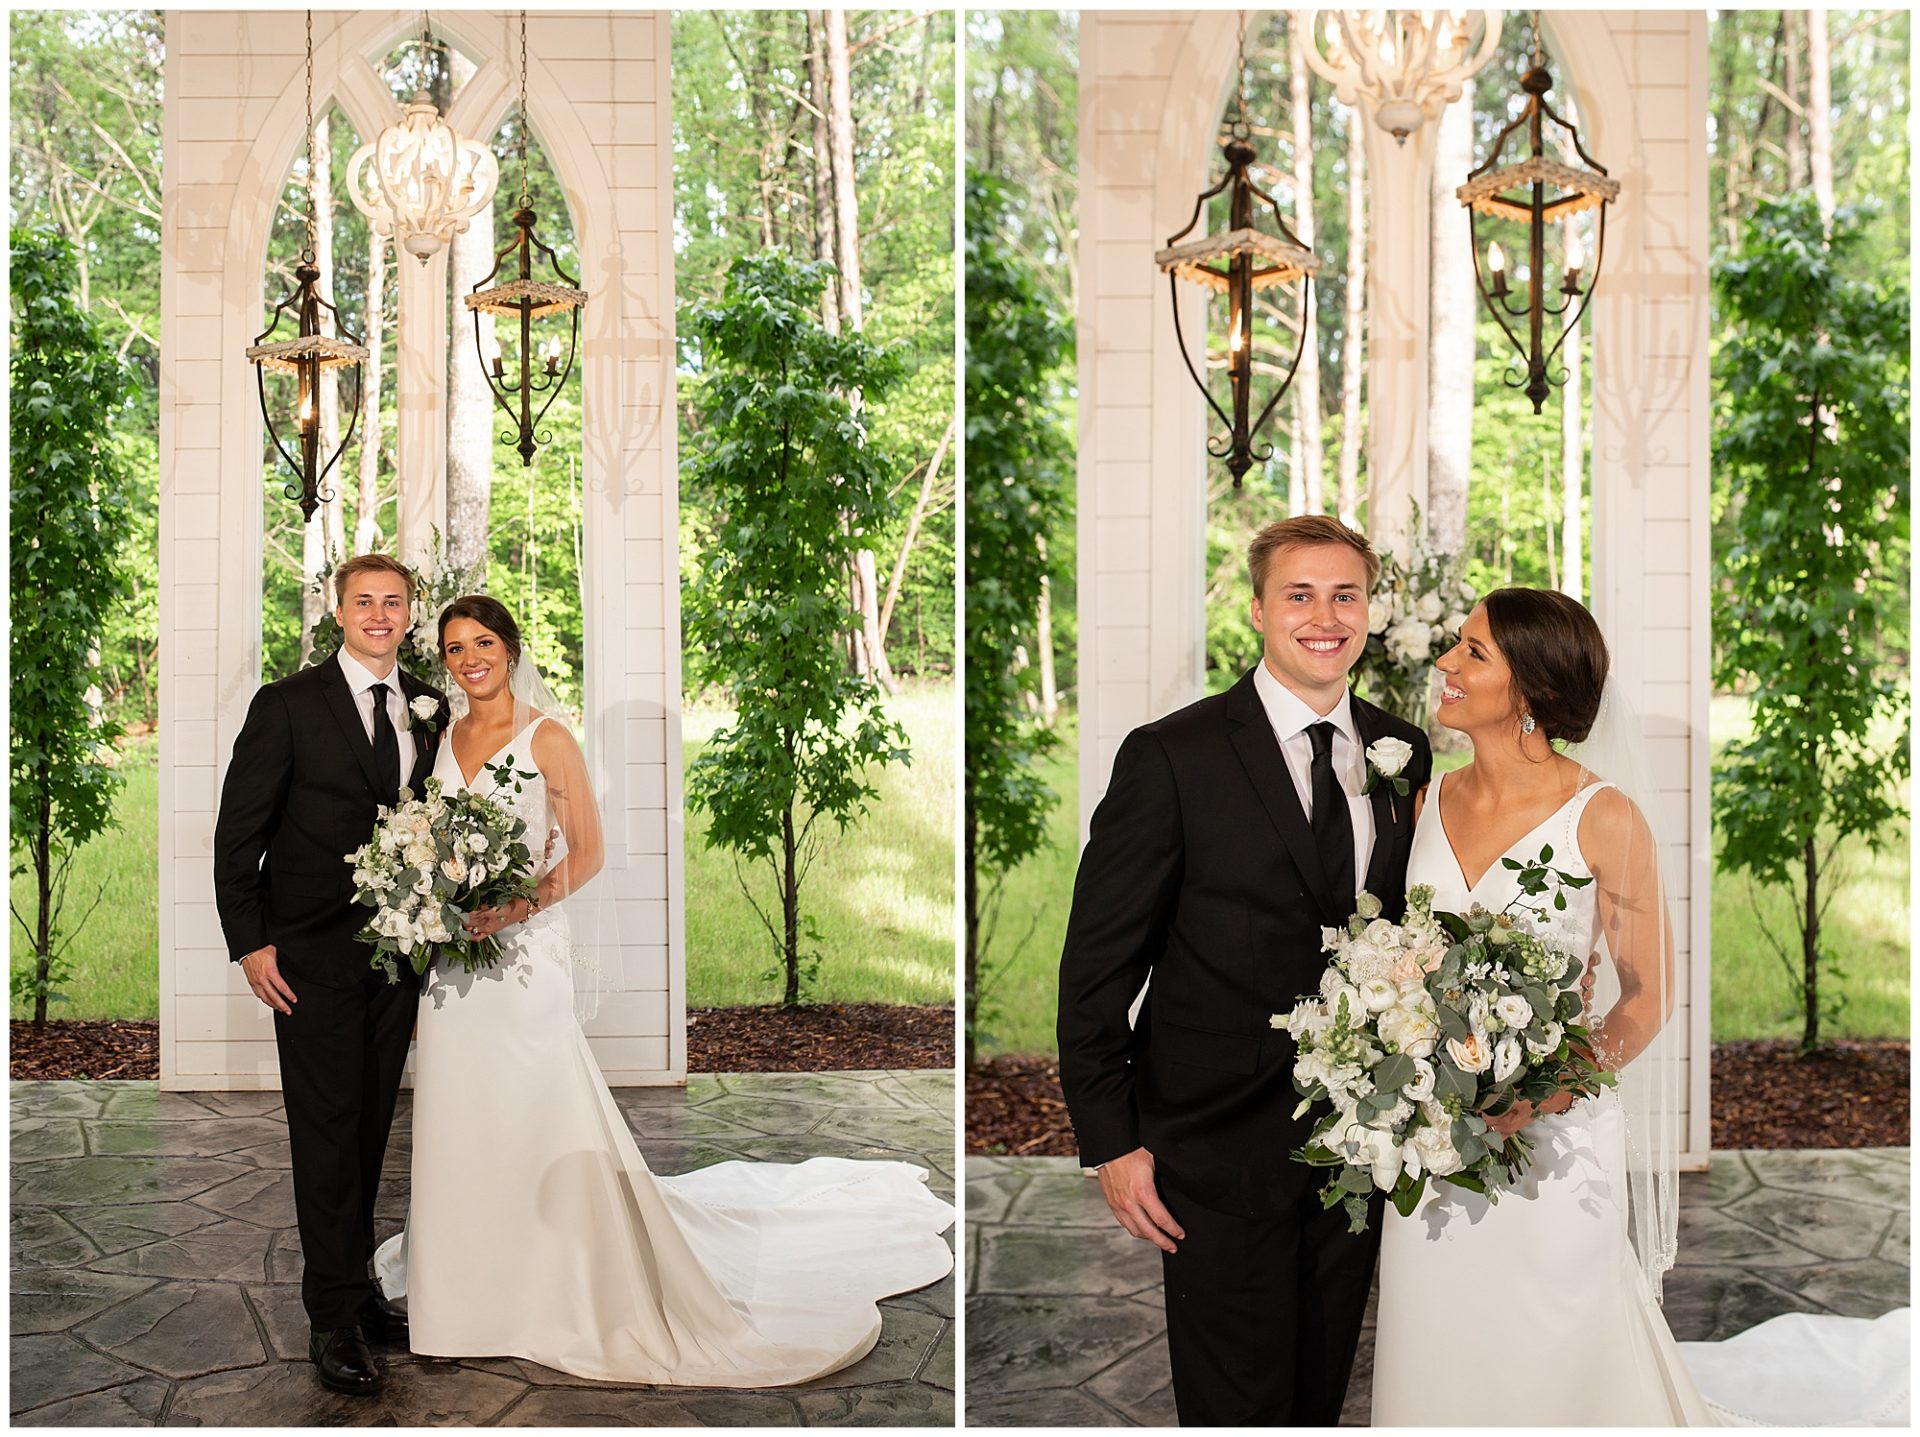 Chapel in the woods, firefly lane wedding, nashville wedding, open air chapel, bride and groom portraits